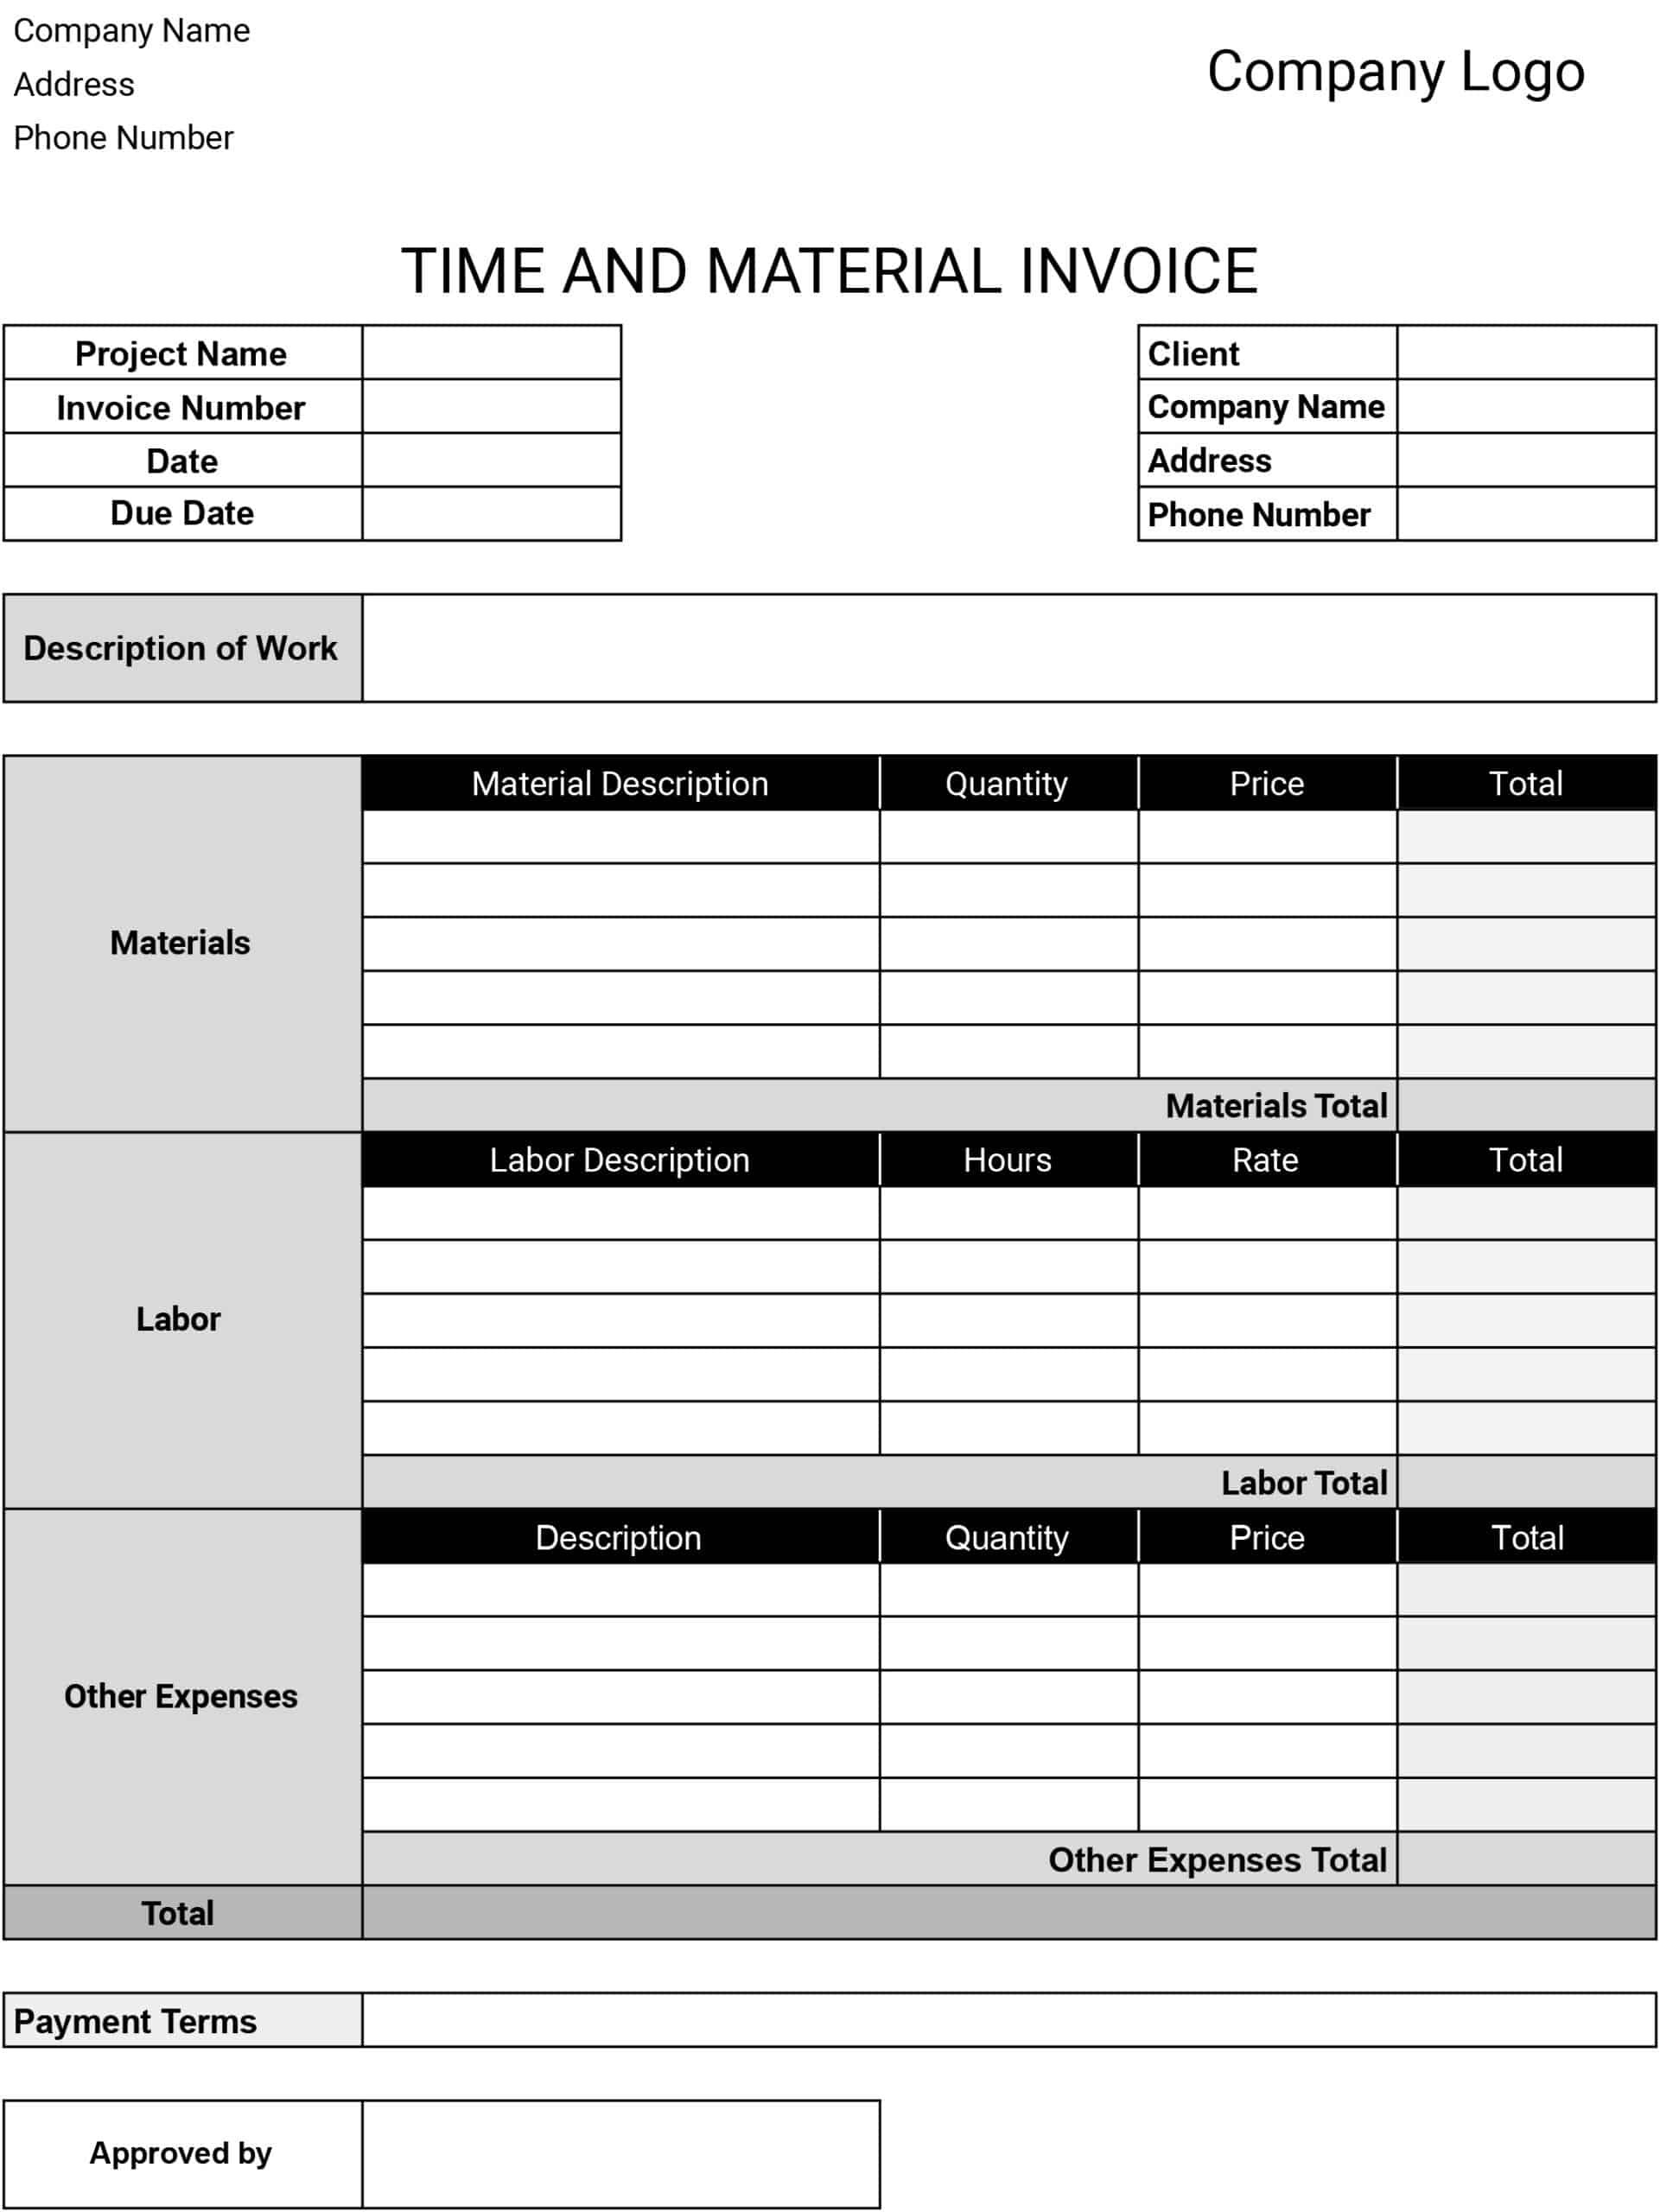 Time and Material Invoice Template